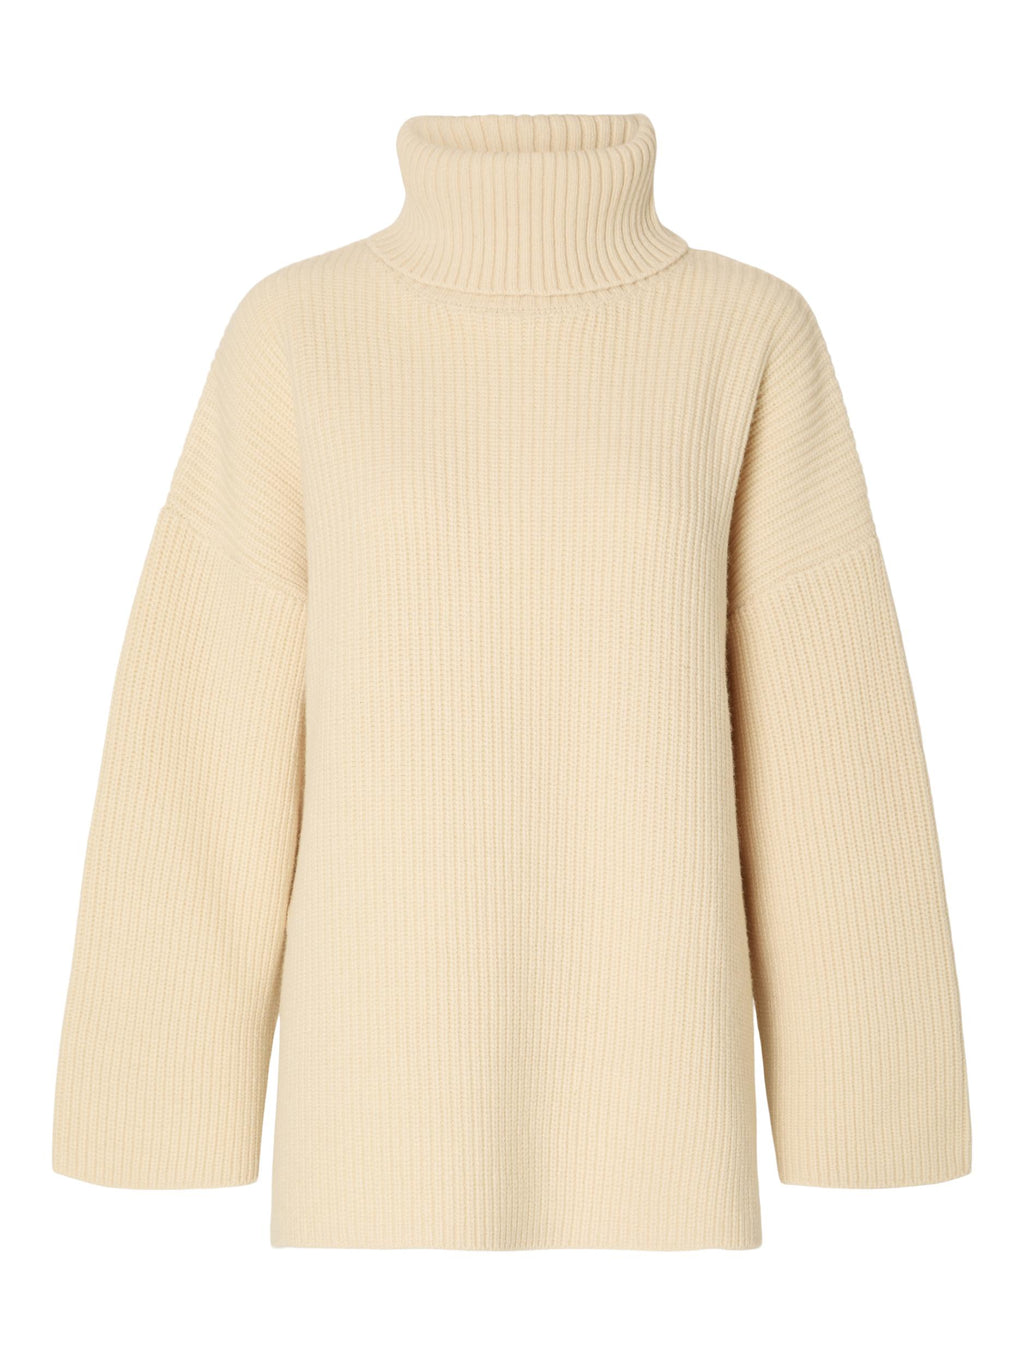 Selected Femme Mary Roll Neck